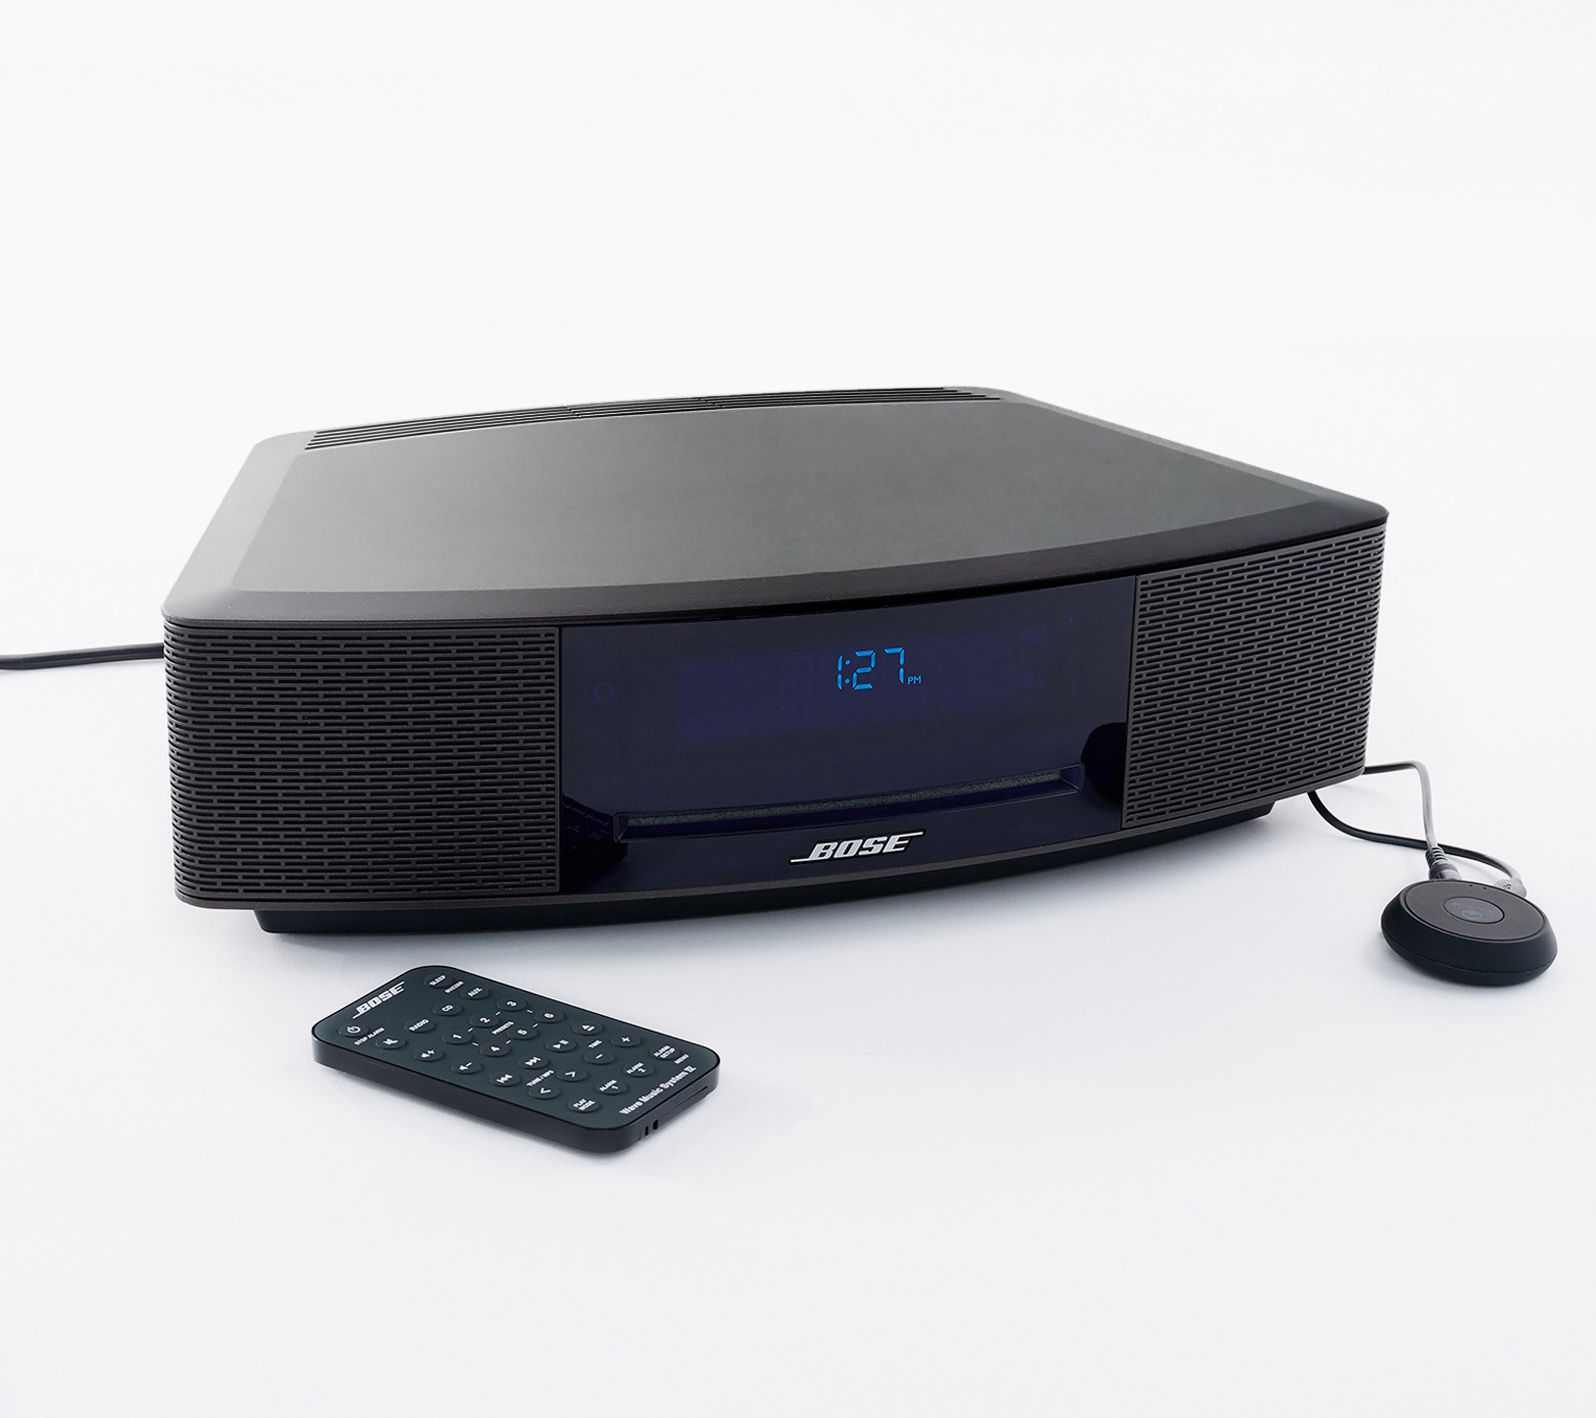 QVC: $210 Off Bose Wave Music System IV with a CD Player & Dual Alarm Clock + Free Standard S&H $289